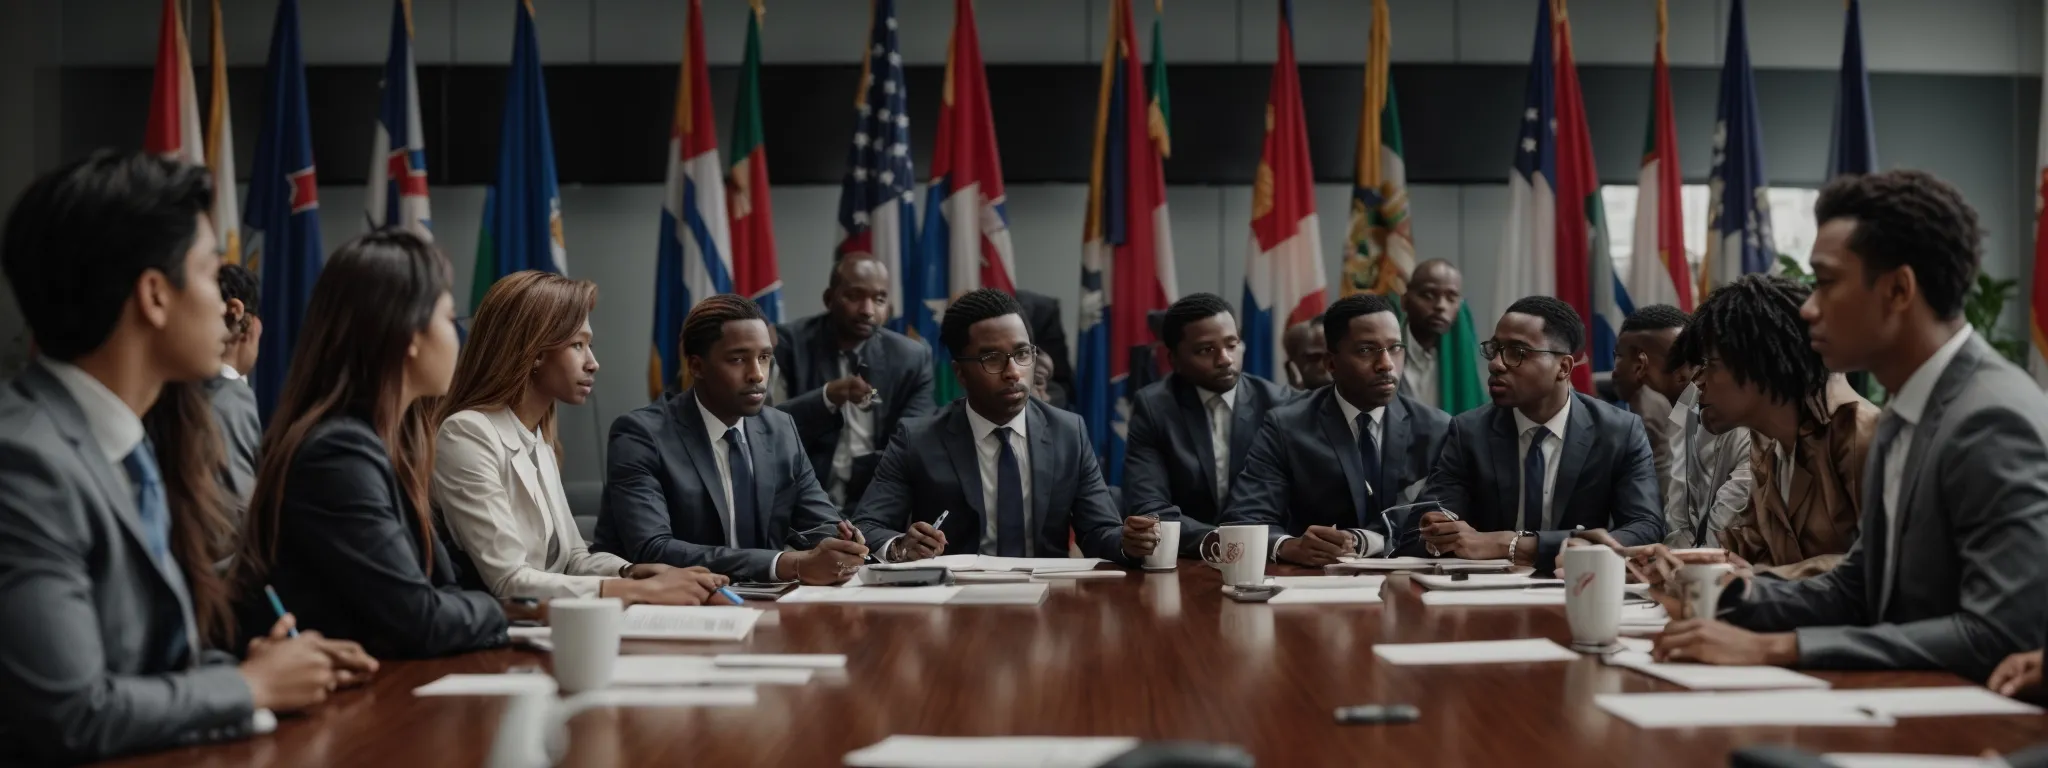 a diverse group of professionals is sitting around a large conference table, engaged in a discussion with legal documents and international flags displayed.